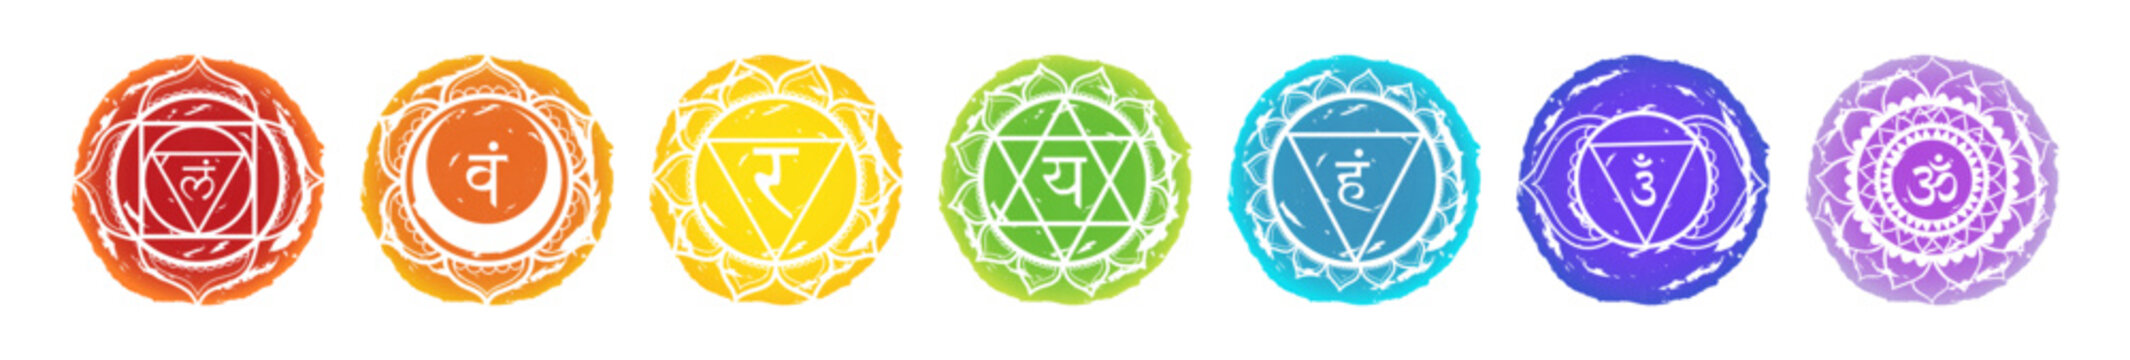 Seven chakras symbols on white background used in a variety of ancient meditation practices.